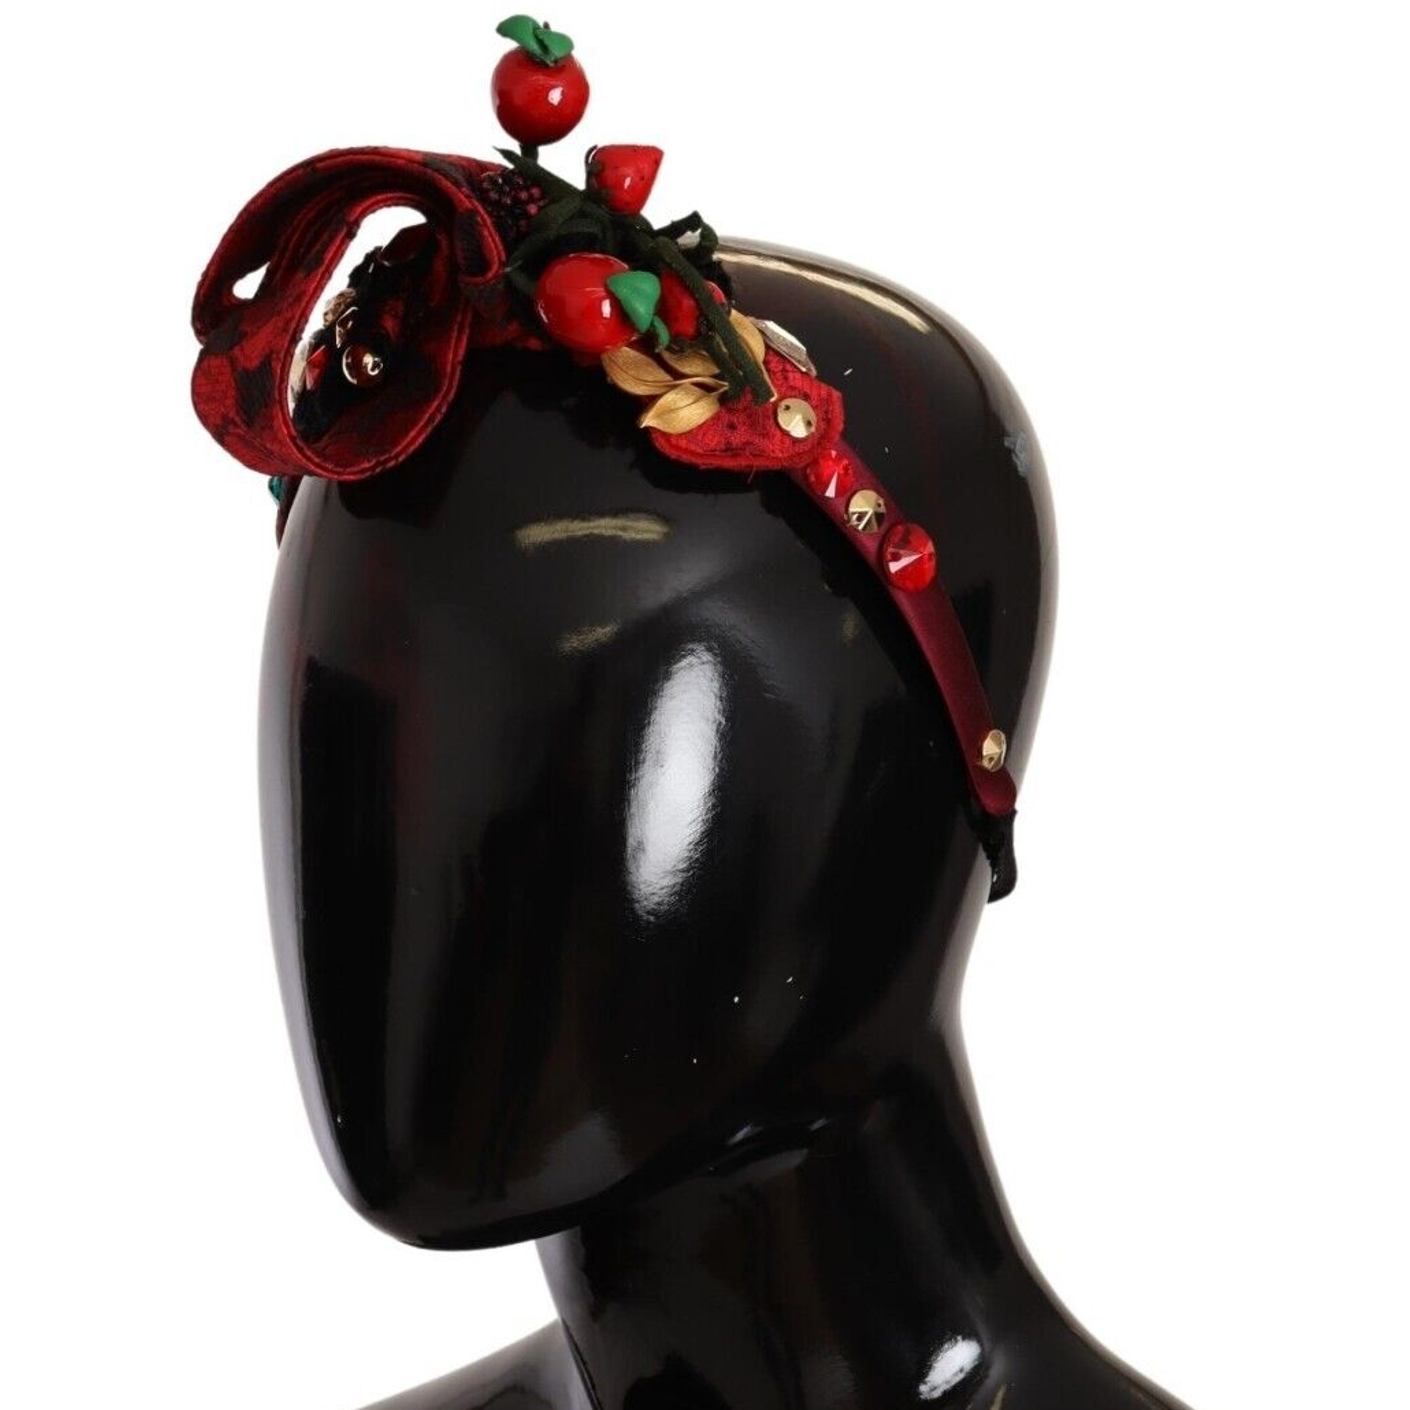 Dolce & Gabbana Exquisite Berry Crystal Embellished Diadem red-tiara-berry-fruit-crystal-bow-hair-diadem-headband